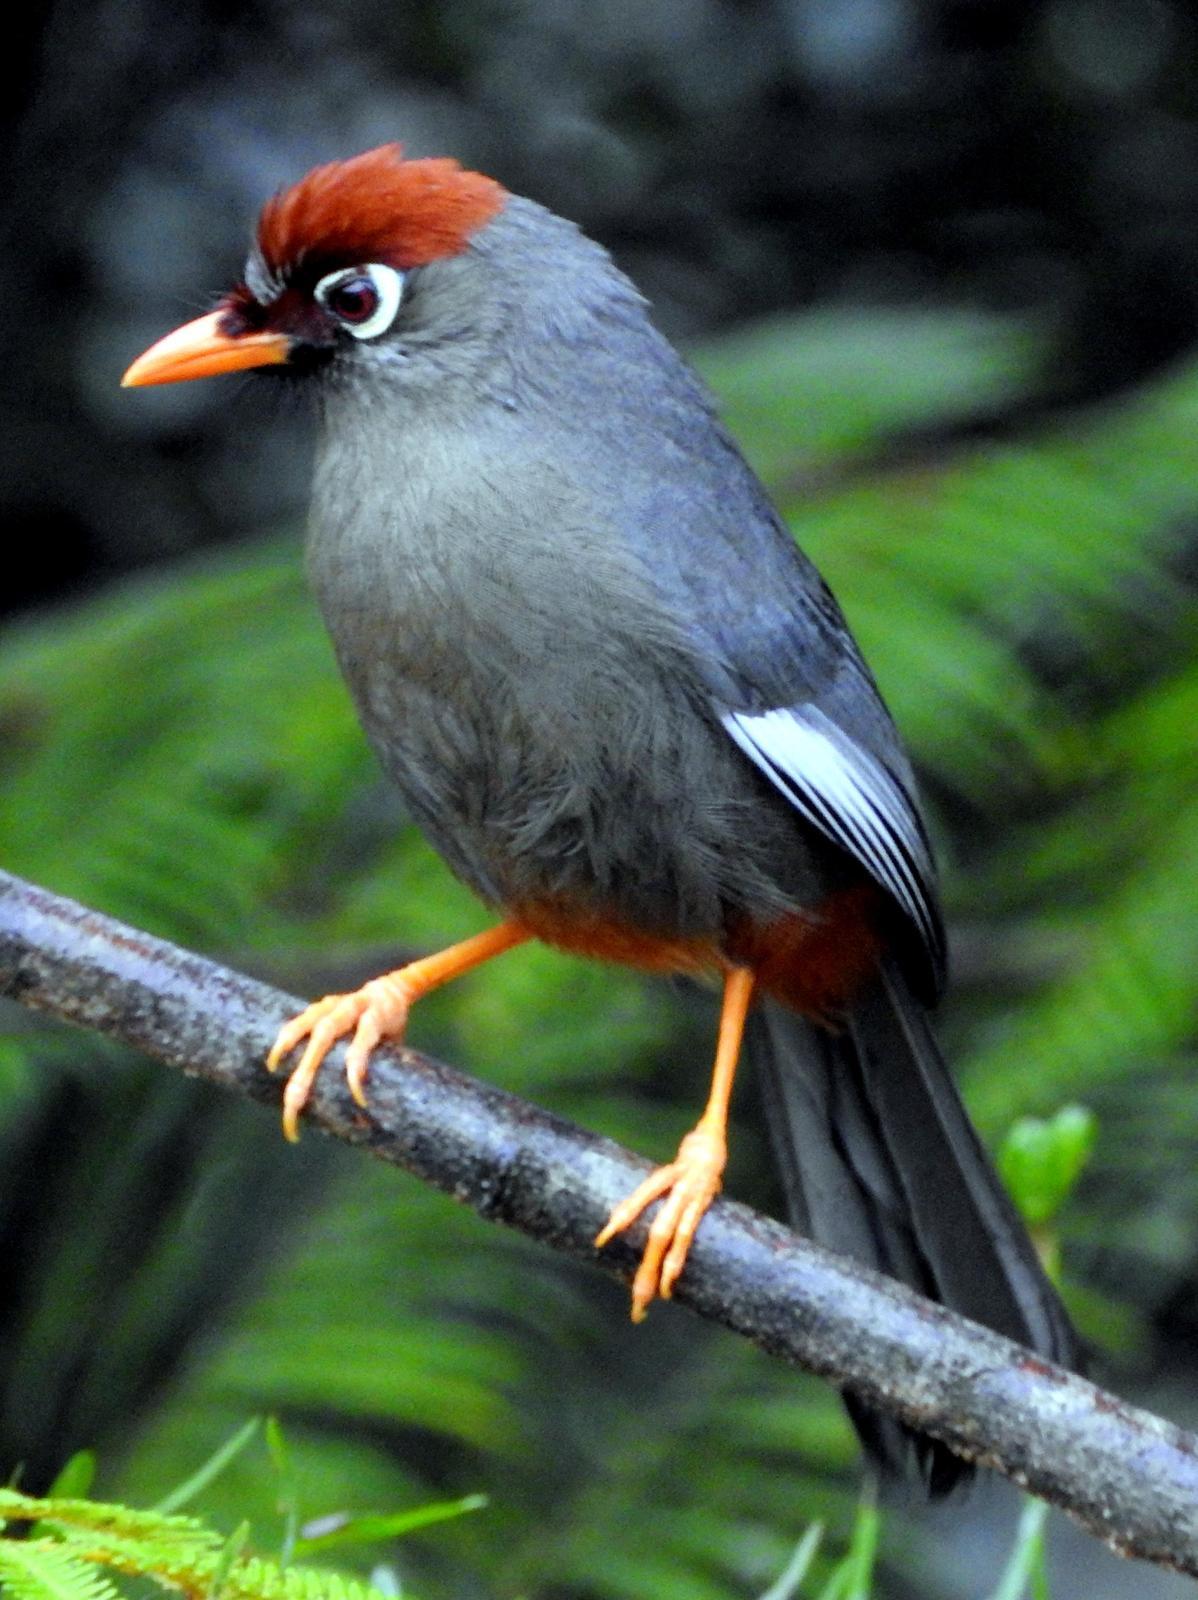 Chestnut-capped Laughingthrush Photo by Todd A. Watkins